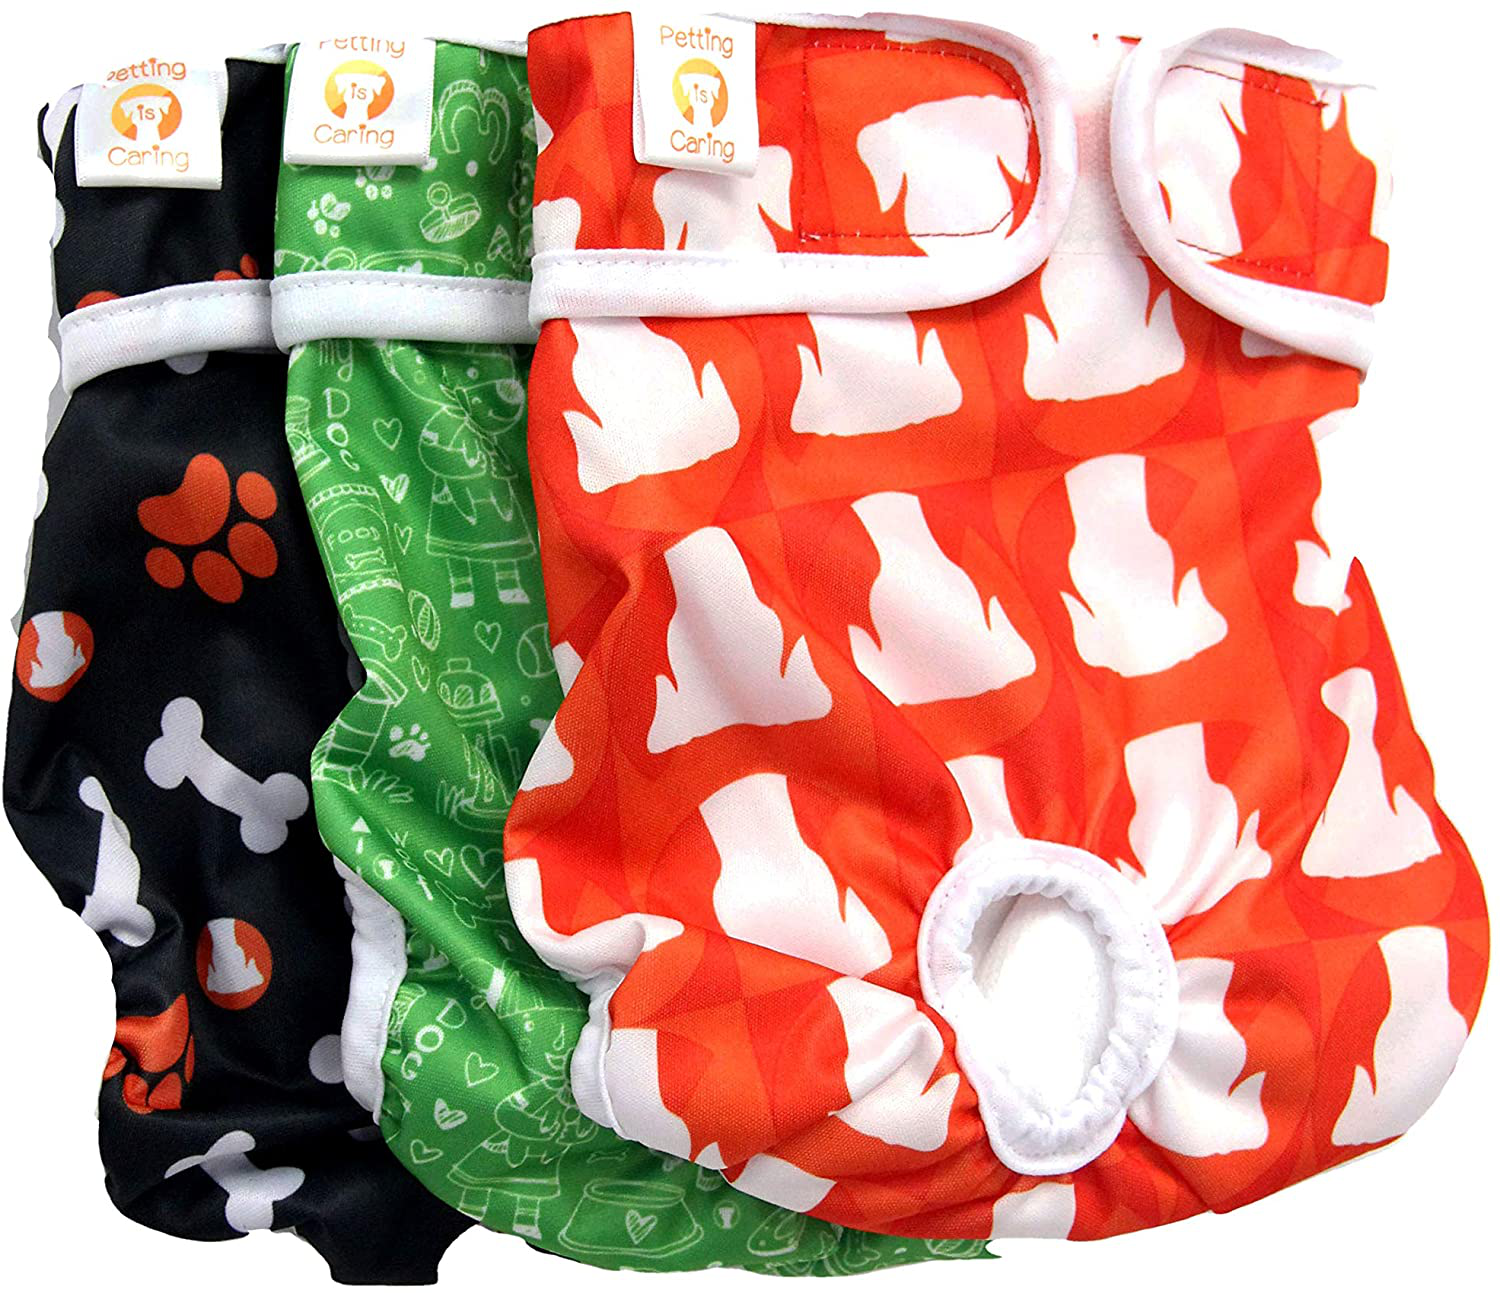 PETTING IS CARING Dog Diapers Washable & Reusable Female and Male Dog Diapers Materials Durable Machine Washable Solution for Pet Incontinence and Long Travels - 3 Pack Set Animals & Pet Supplies > Pet Supplies > Dog Supplies > Dog Diaper Pads & Liners PETTING IS CARING NEW XS 